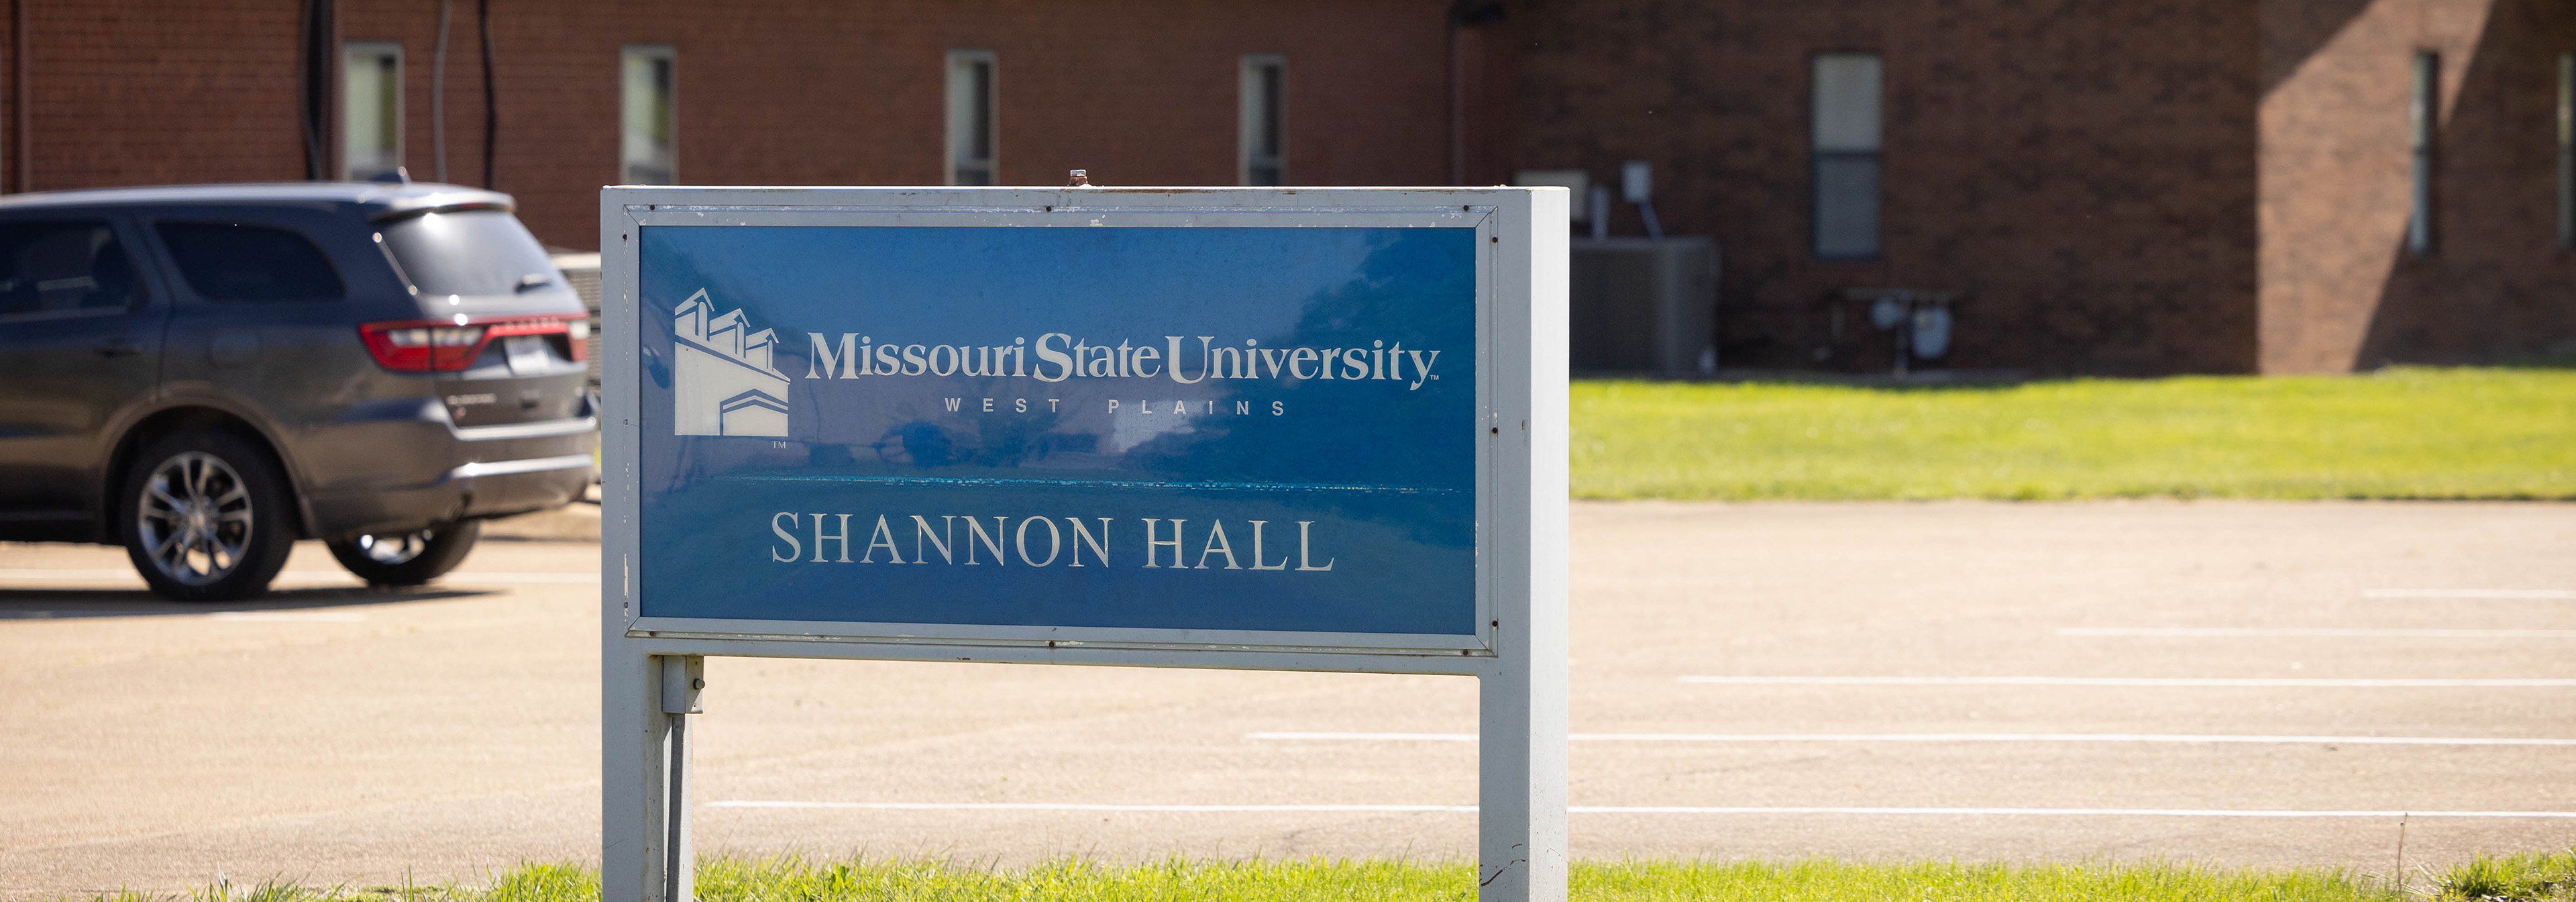 shannon hall sign